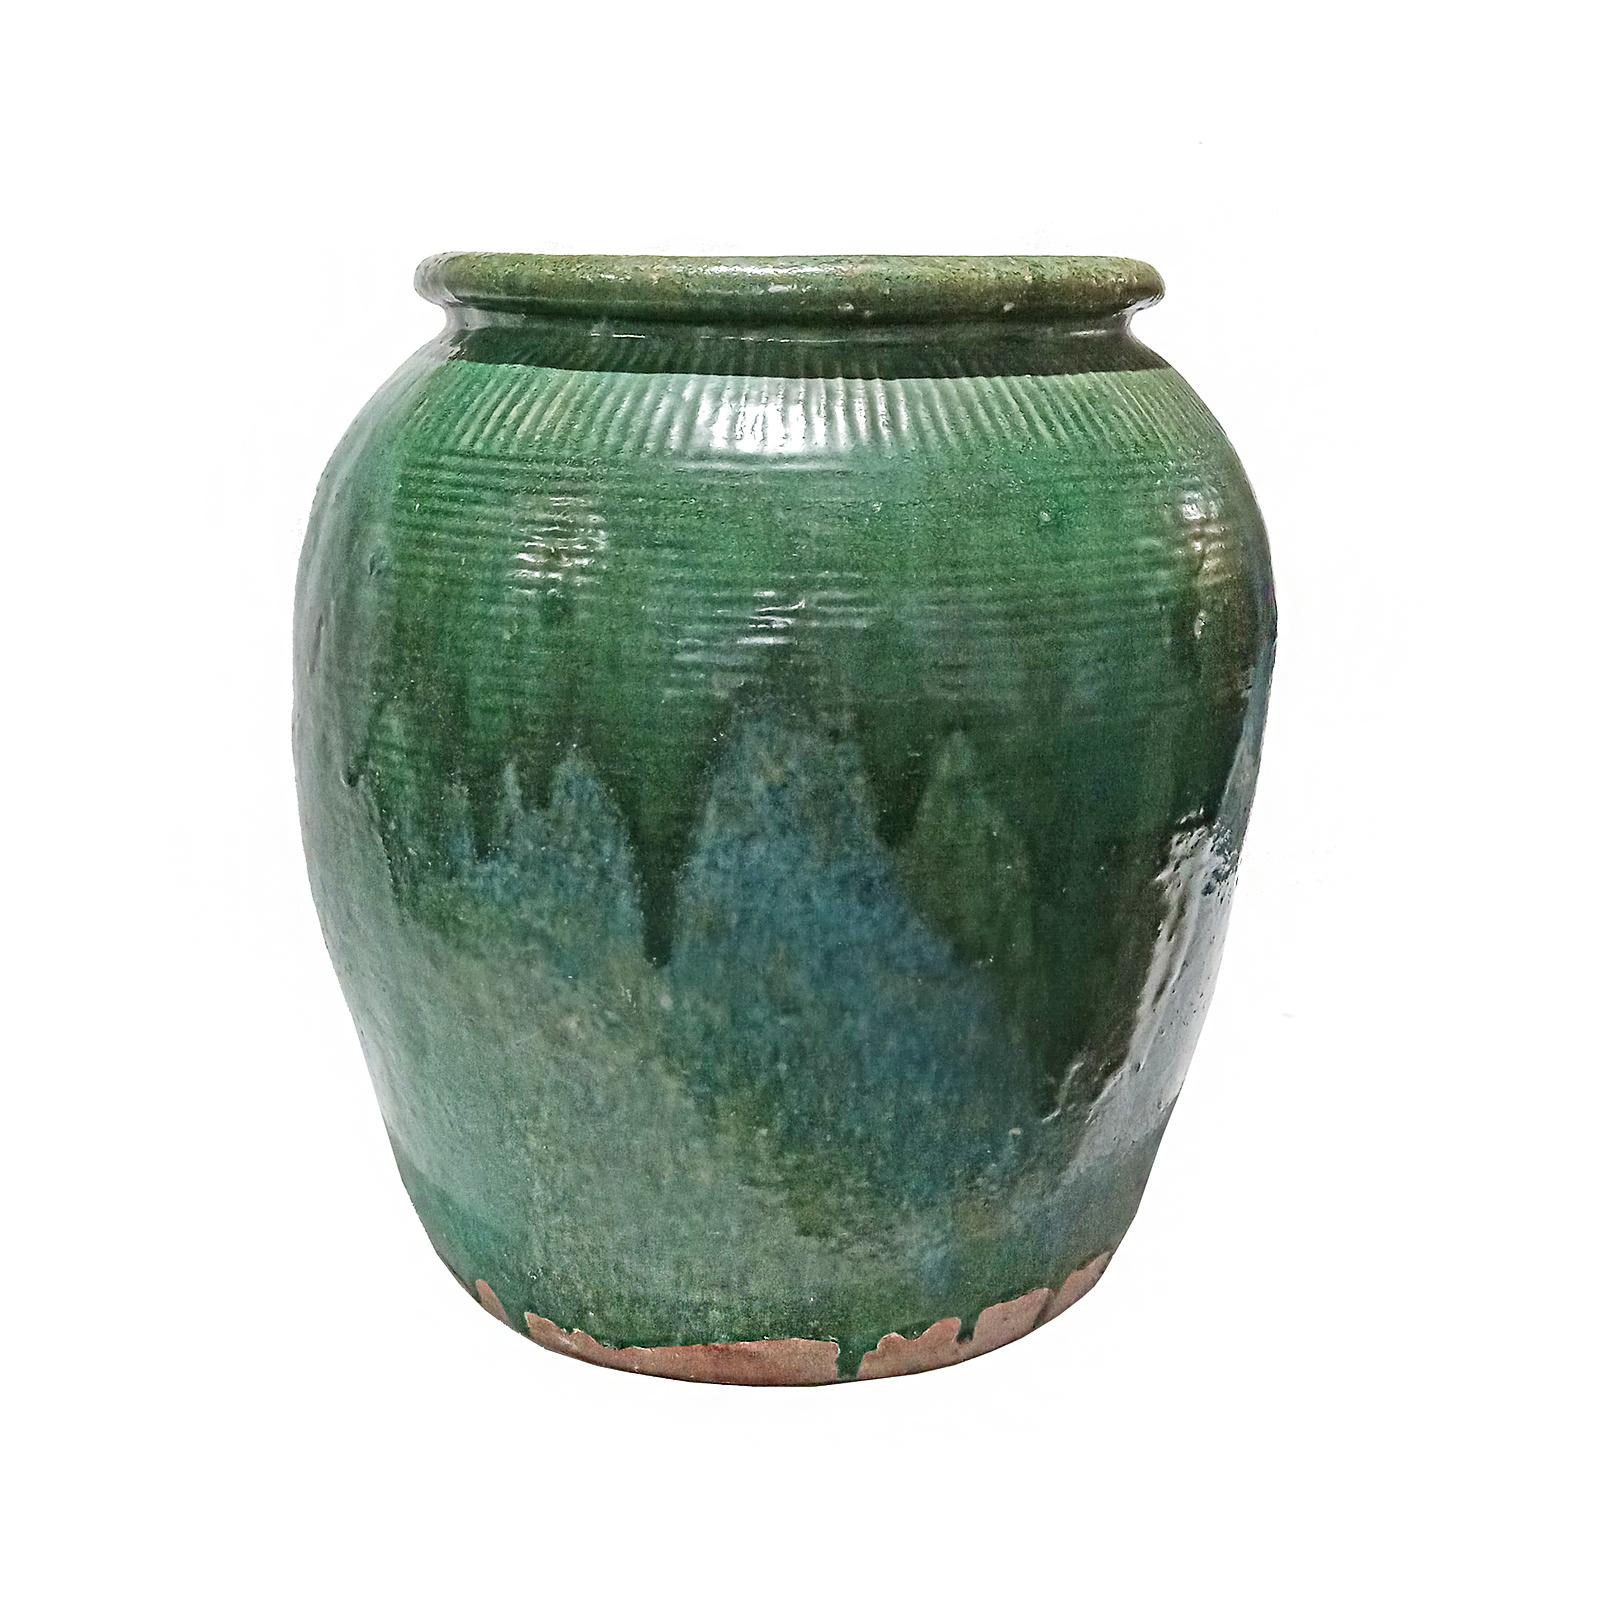 A large Terracotta jar / urn / planter from Bali, Indonesia, contemporary. 

Beautifully glazed in mottled green, resembling a watercolor with its different tones and shades throughout the piece. 

While the golden age of Thai ceramics ended around